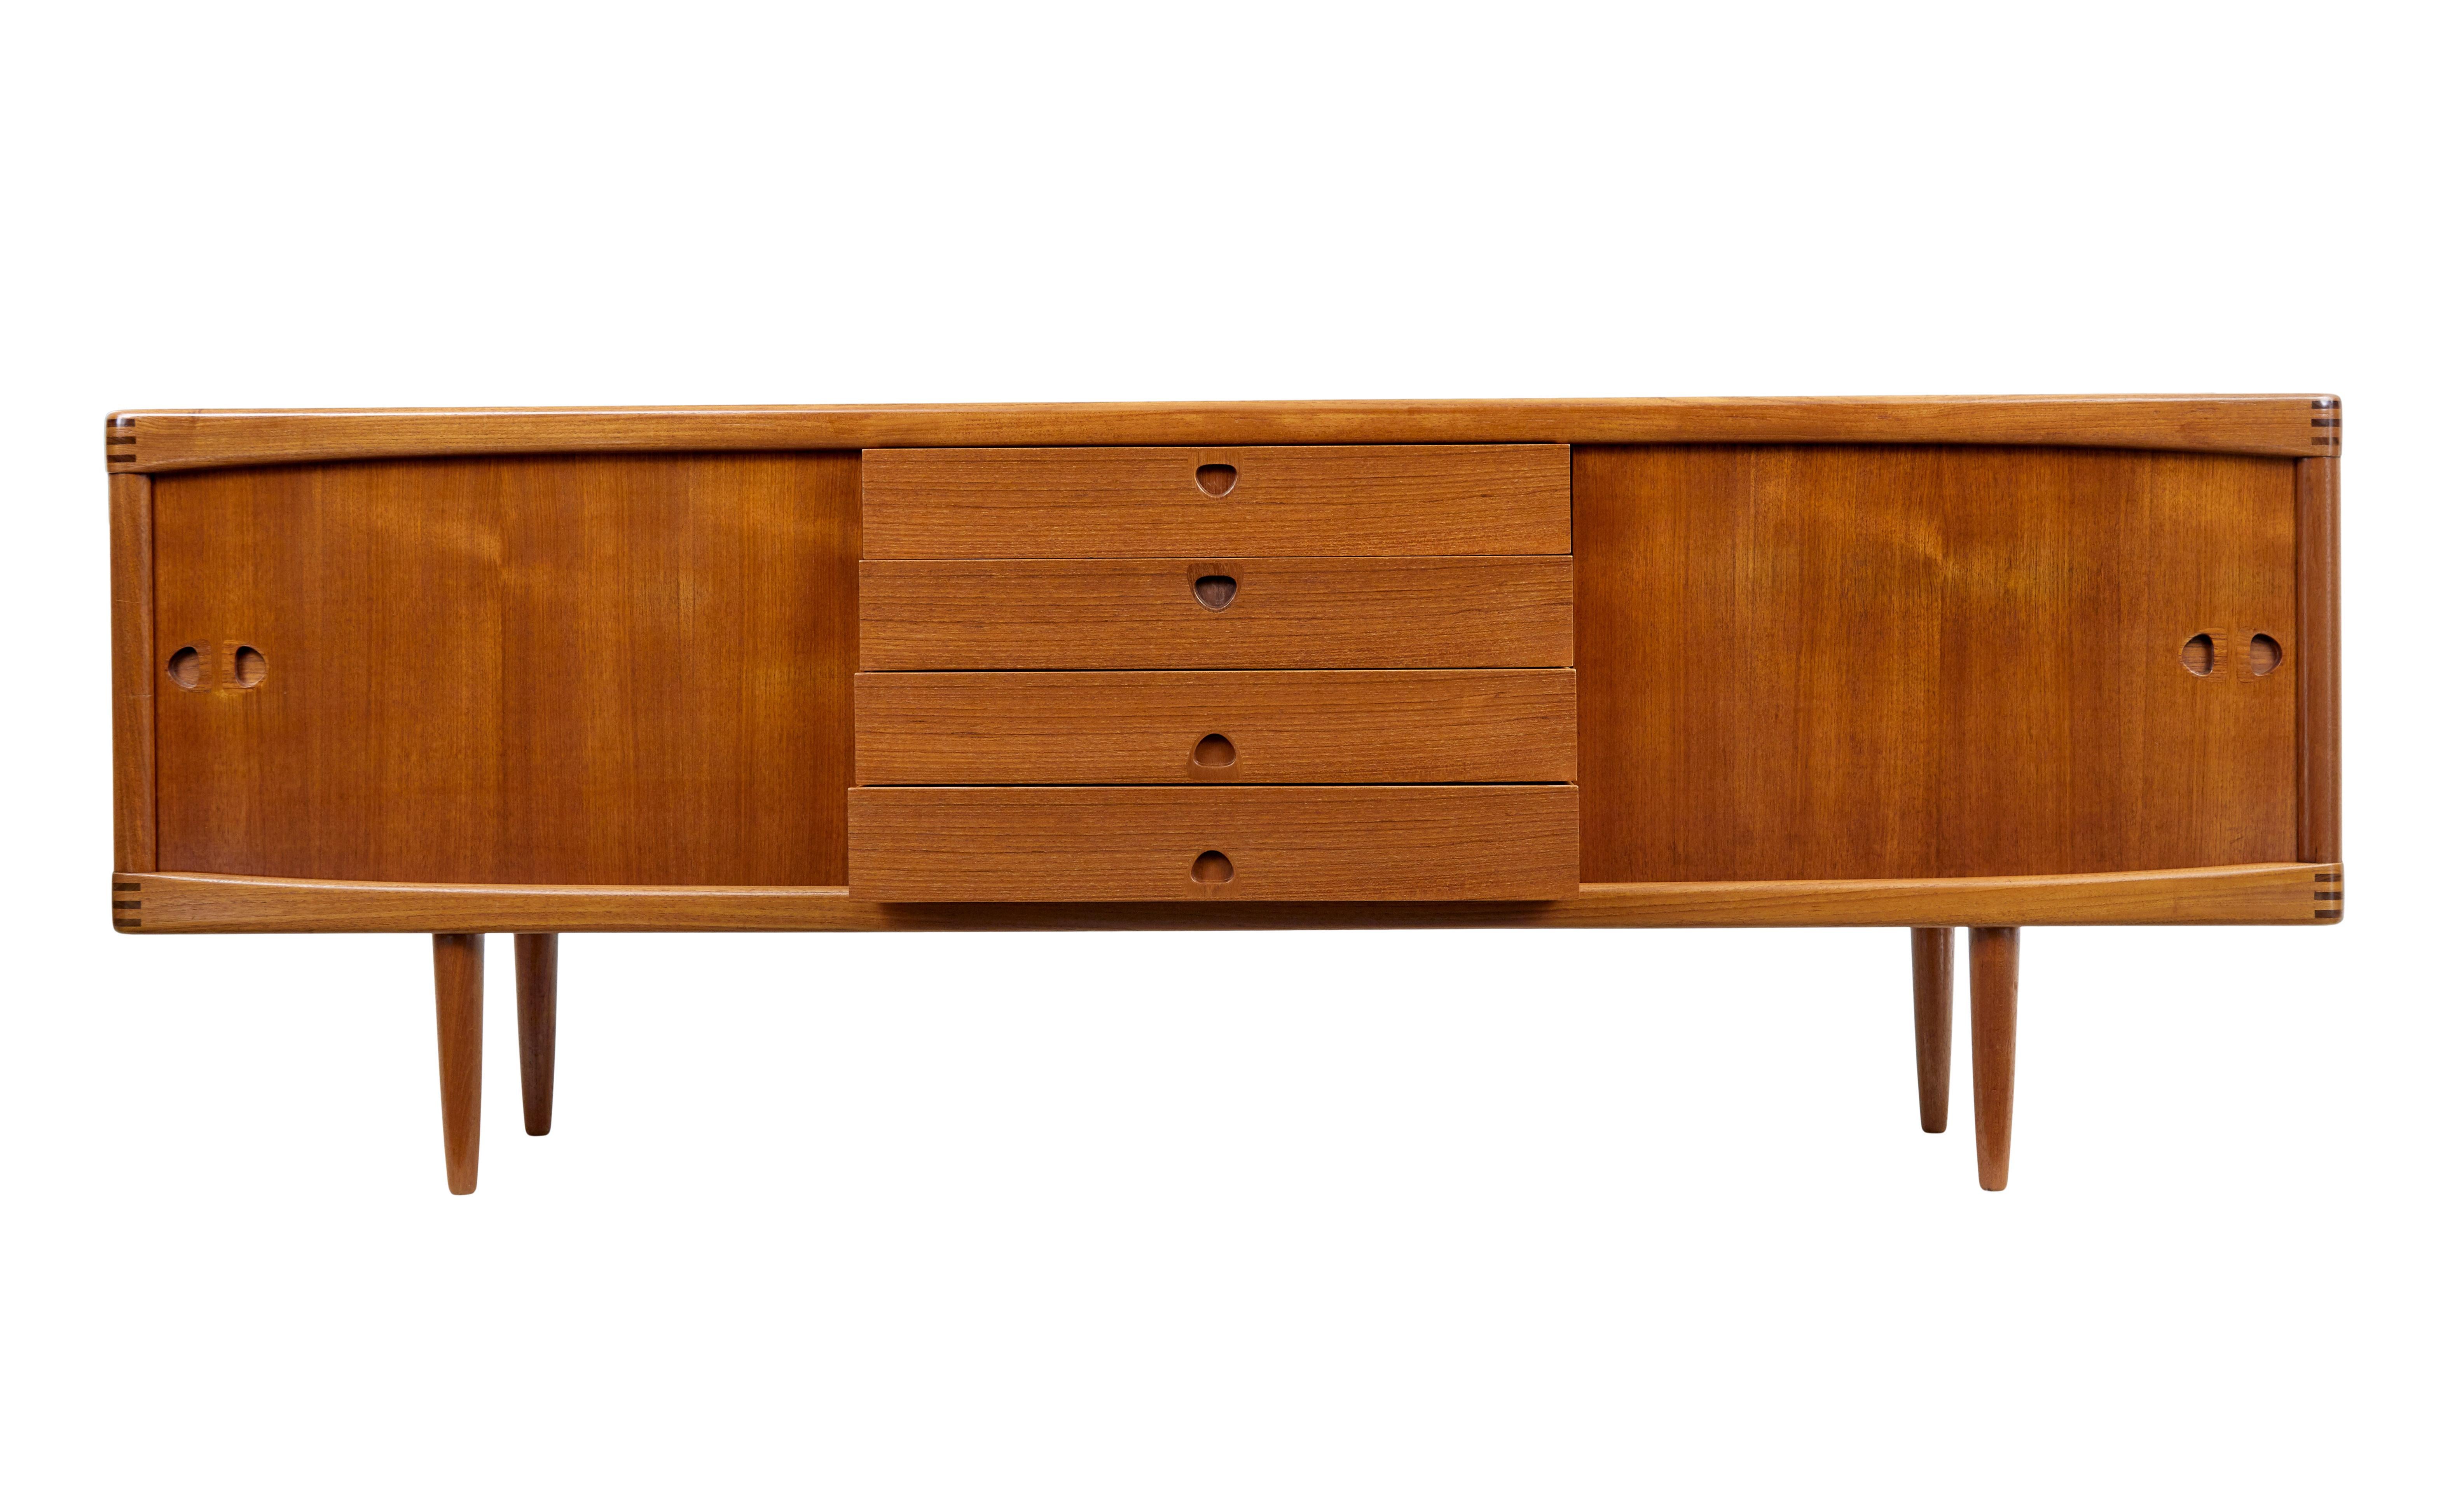 1960's danish teak sideboard by H.W.Klein for Bramin circa 1960.

Here we offer a well known design by Norwegian designer H.W.Klein for Bramin.  Conventional sideboard height with a generous length.

Central bank of 4 drawers, 2 of which are lined